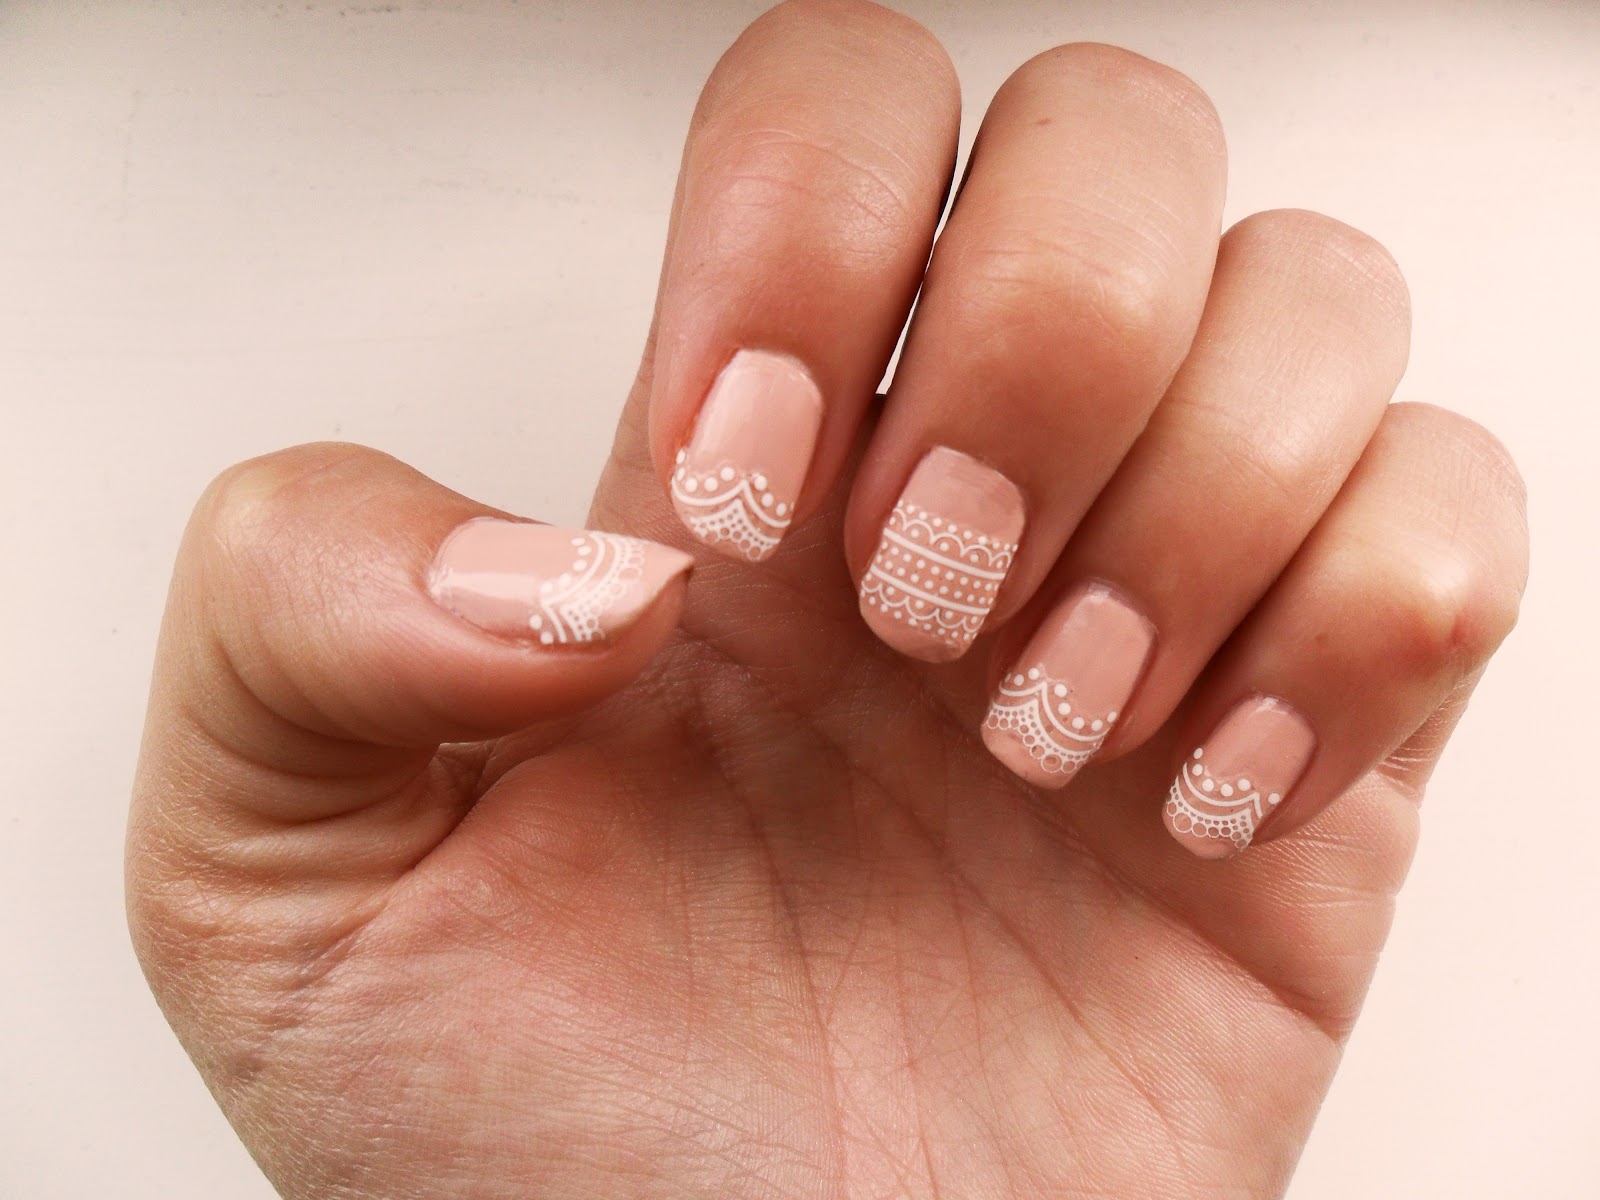 8. Lace Acrylic Nails - wide 5